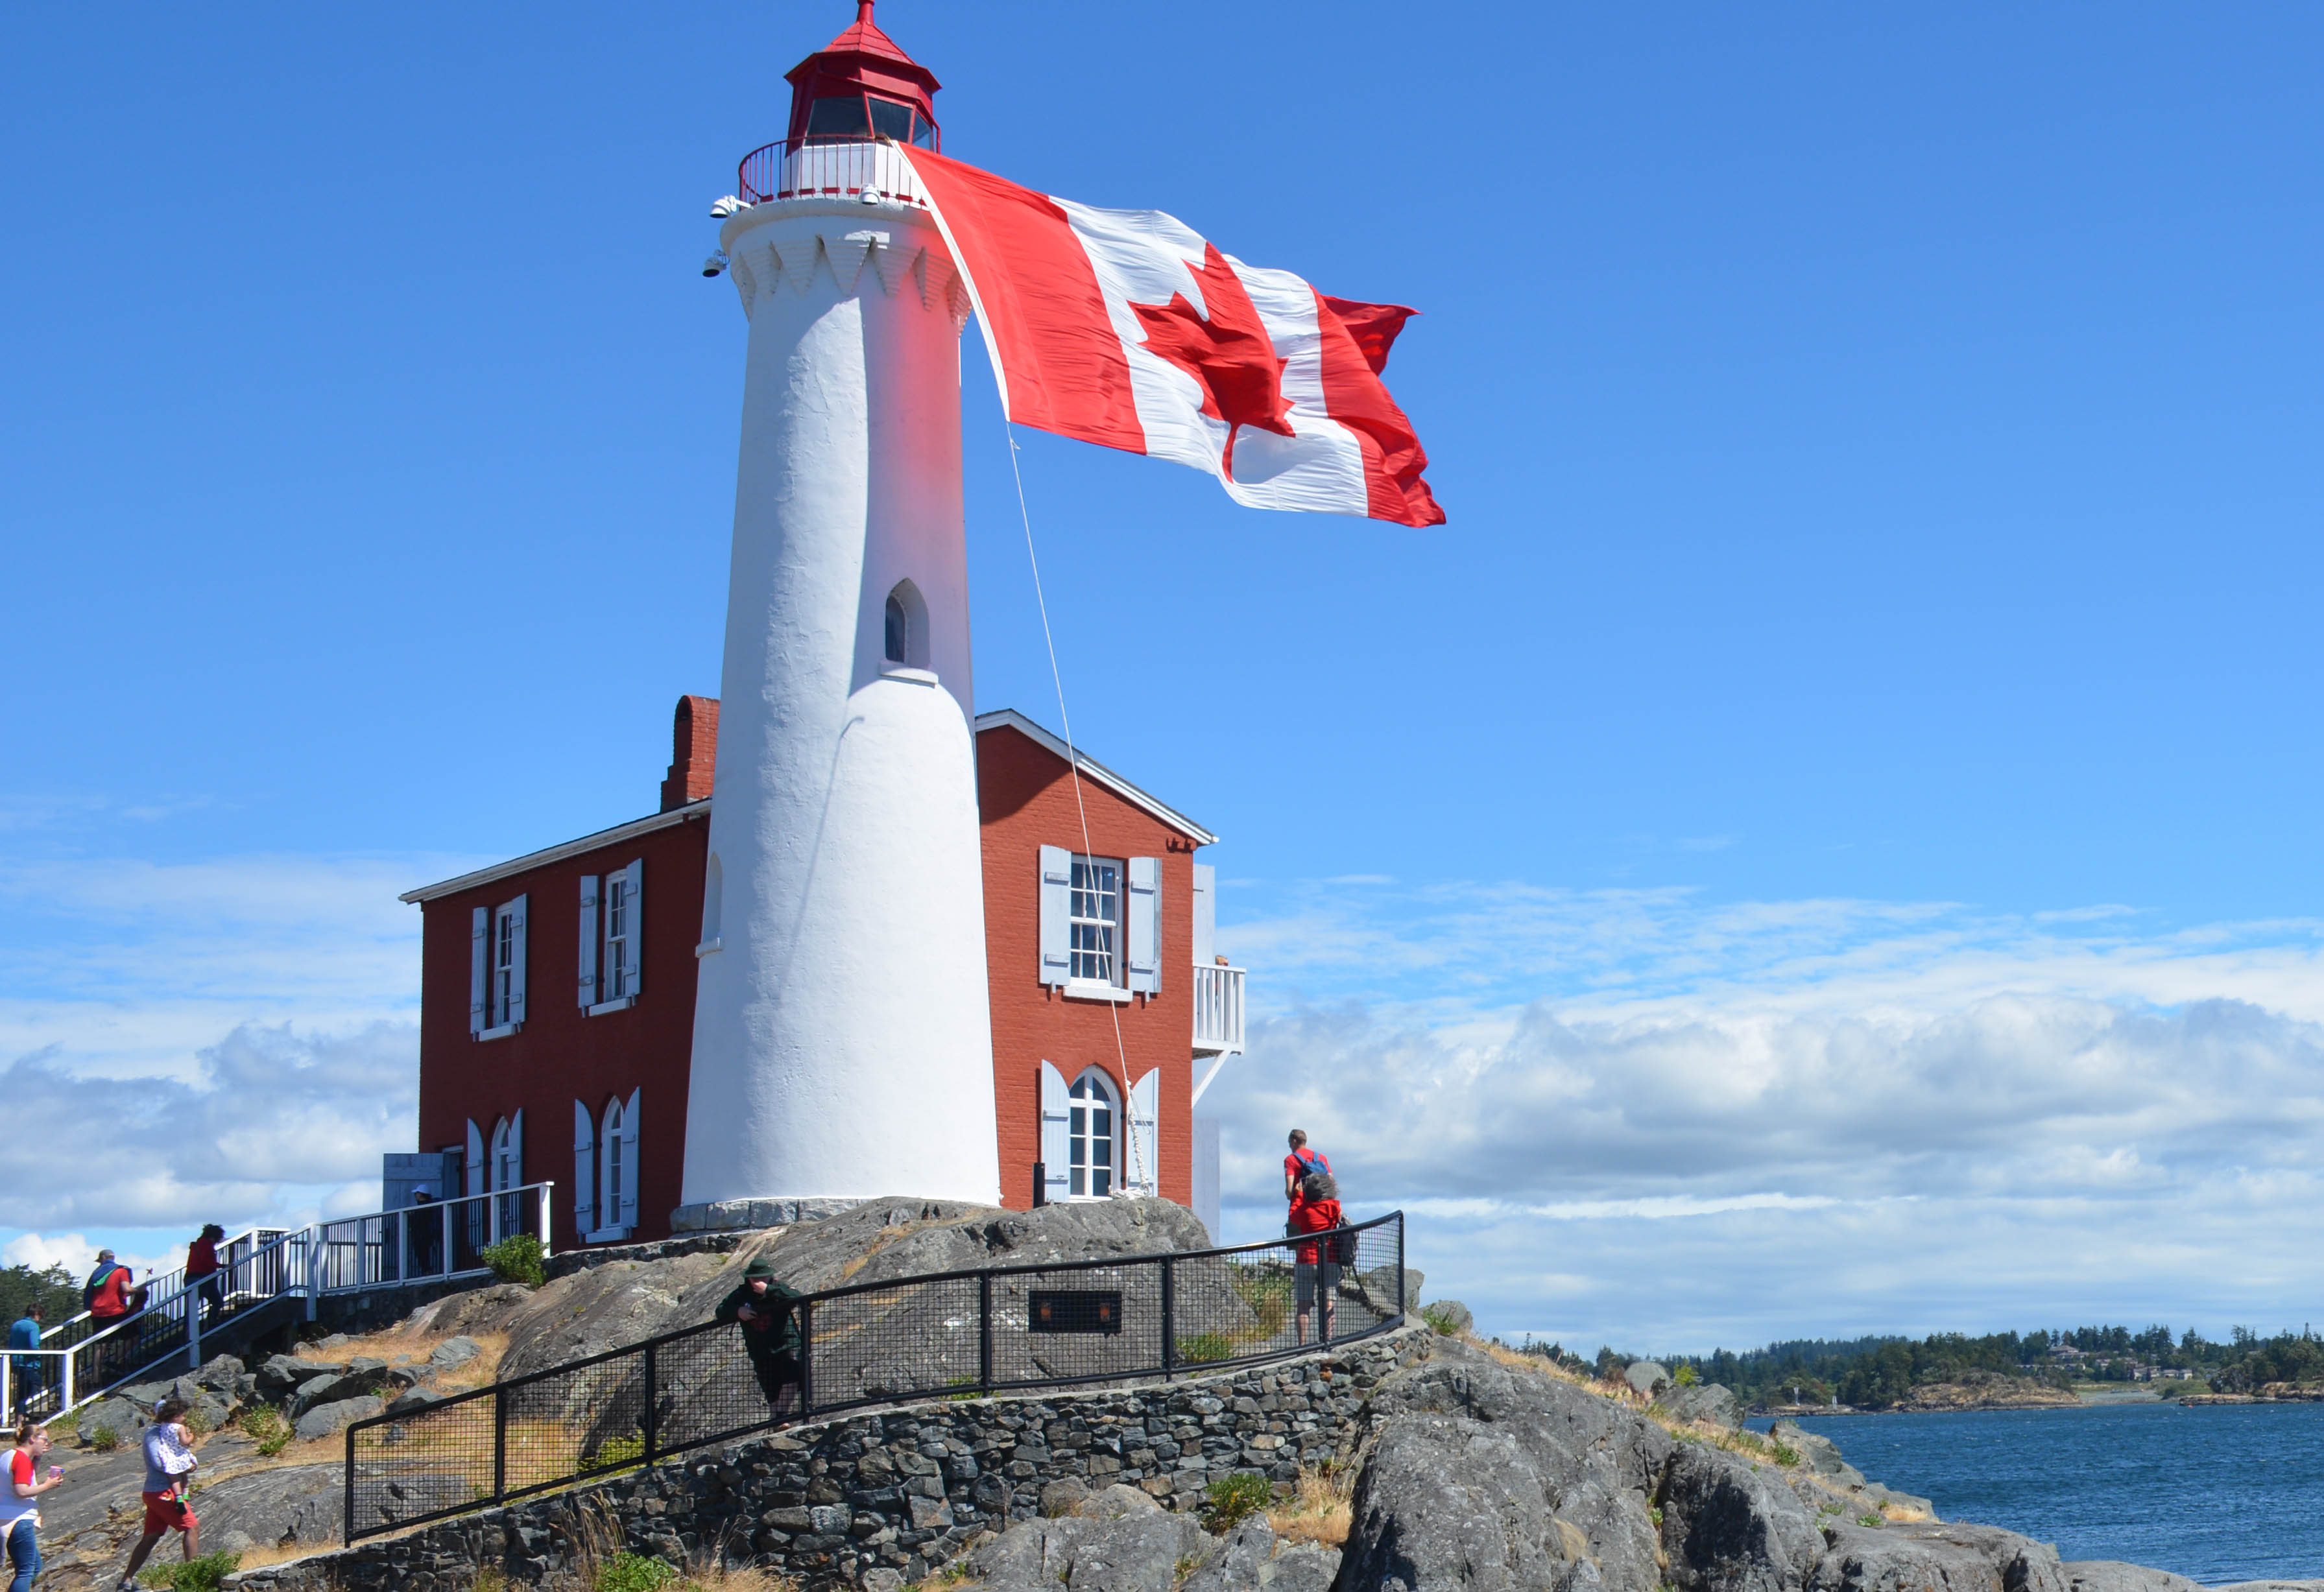 A giant Canada flag hanging from the top of the Fisgard lighthouse tower flying in the wind.